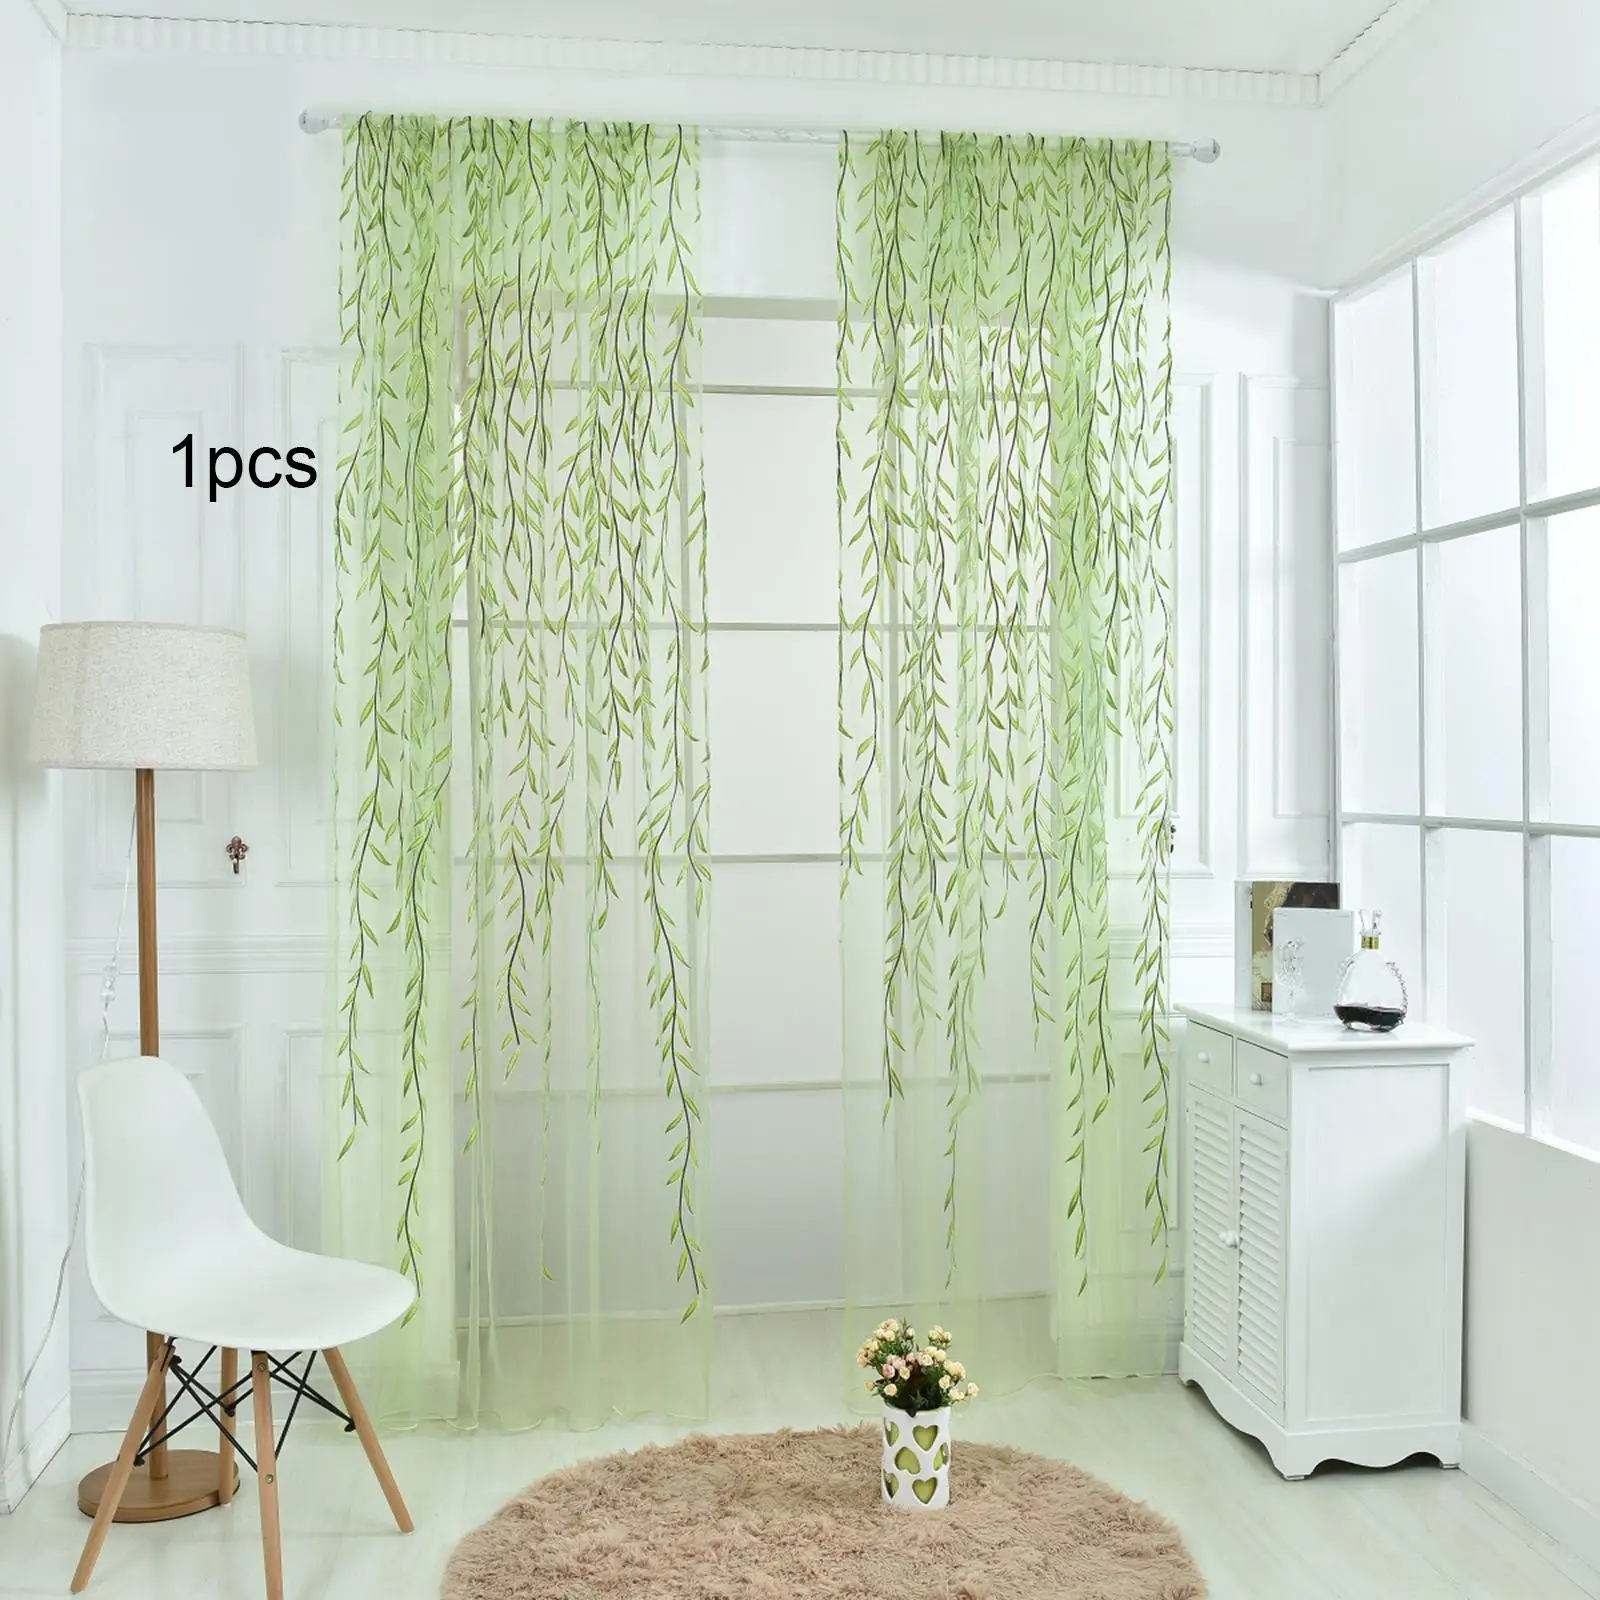 Soft Voile Curtain Window Curtains for Bathroom Study Room 39.37x78.74Inches